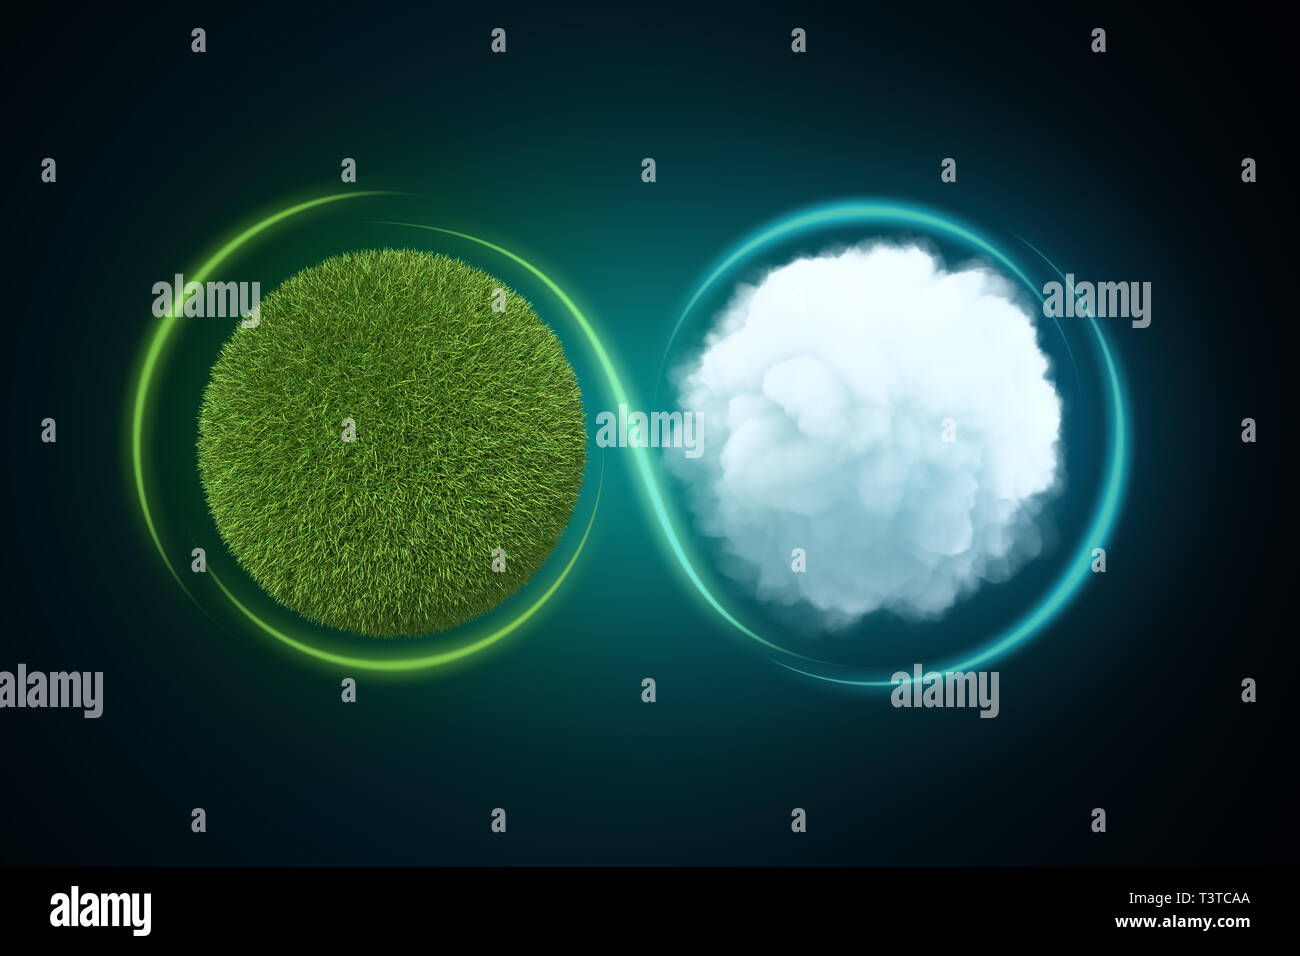 3d rendering of a sphere covered in green lawn next to a white round fluffy cloud with a light line traced around them forming the infinity sign. Stock Photo